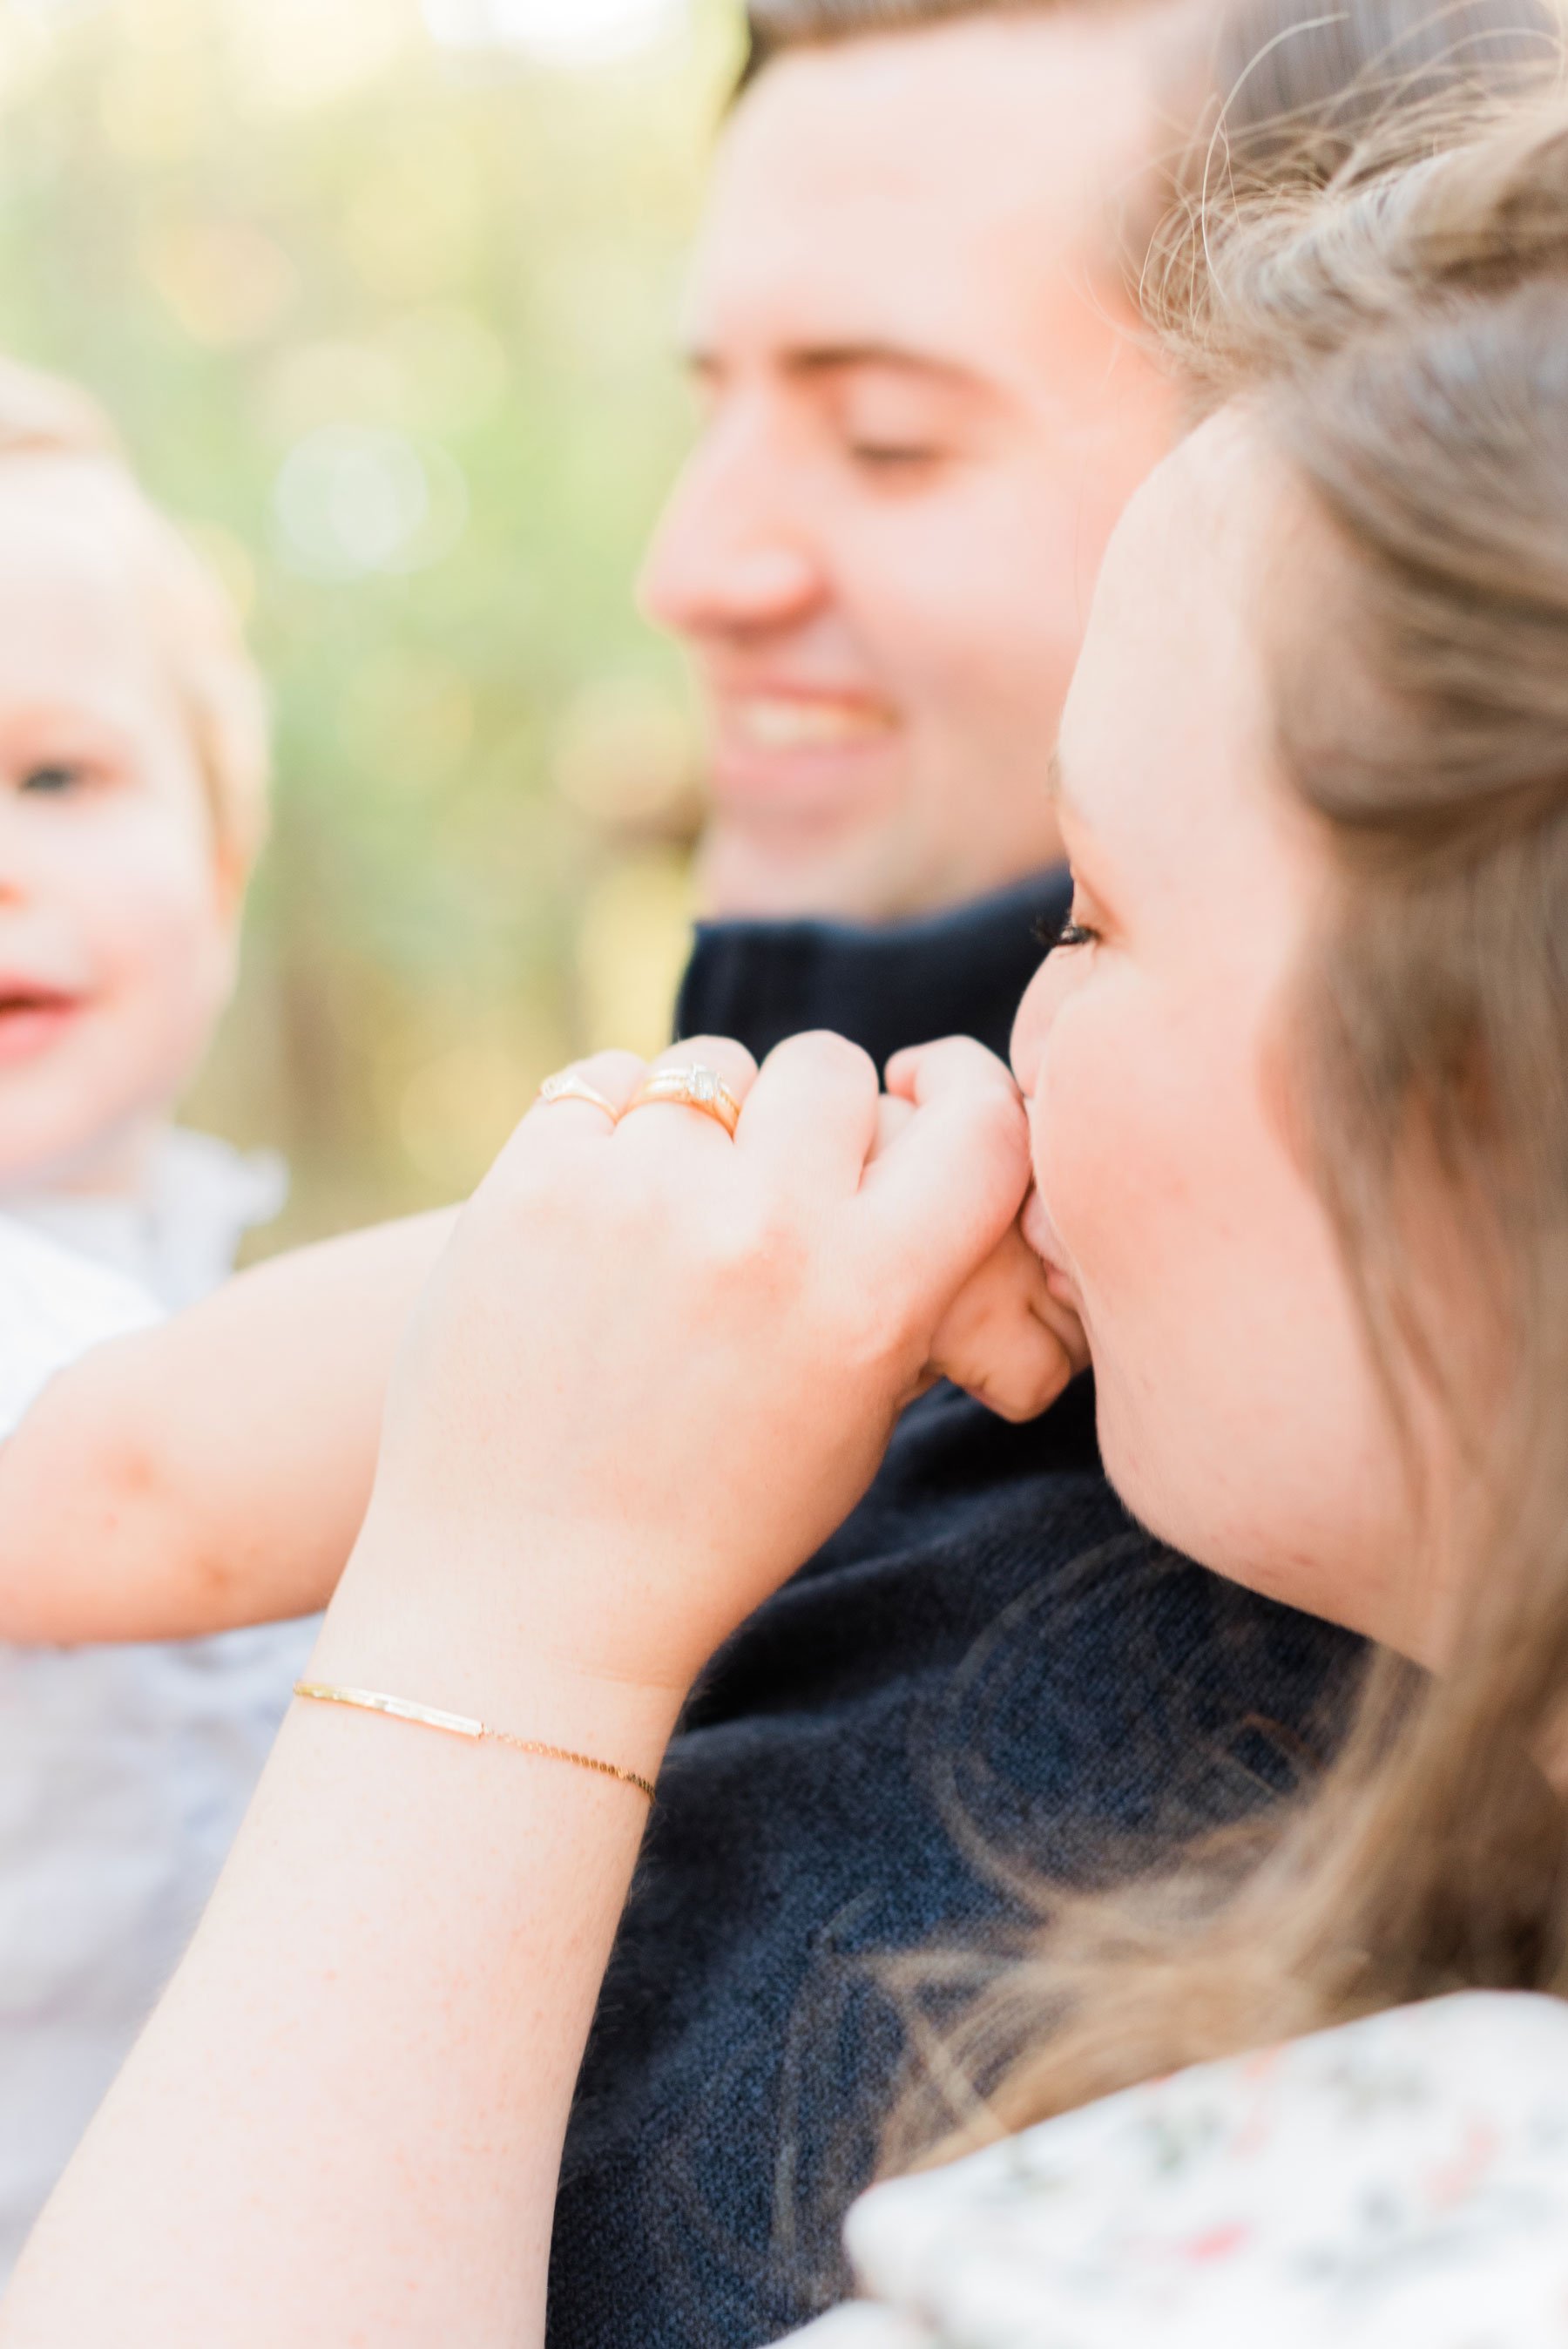  Jacquie Erickson draws attention to detail with blurred photo subjects. Family of three little boy mama’s boy Altlanta, Georgia Peachtree City Fayetteville Senoia&nbsp; #jacquieericksonphotography #atlantaphotographer #familyphotos #familyofthree #f